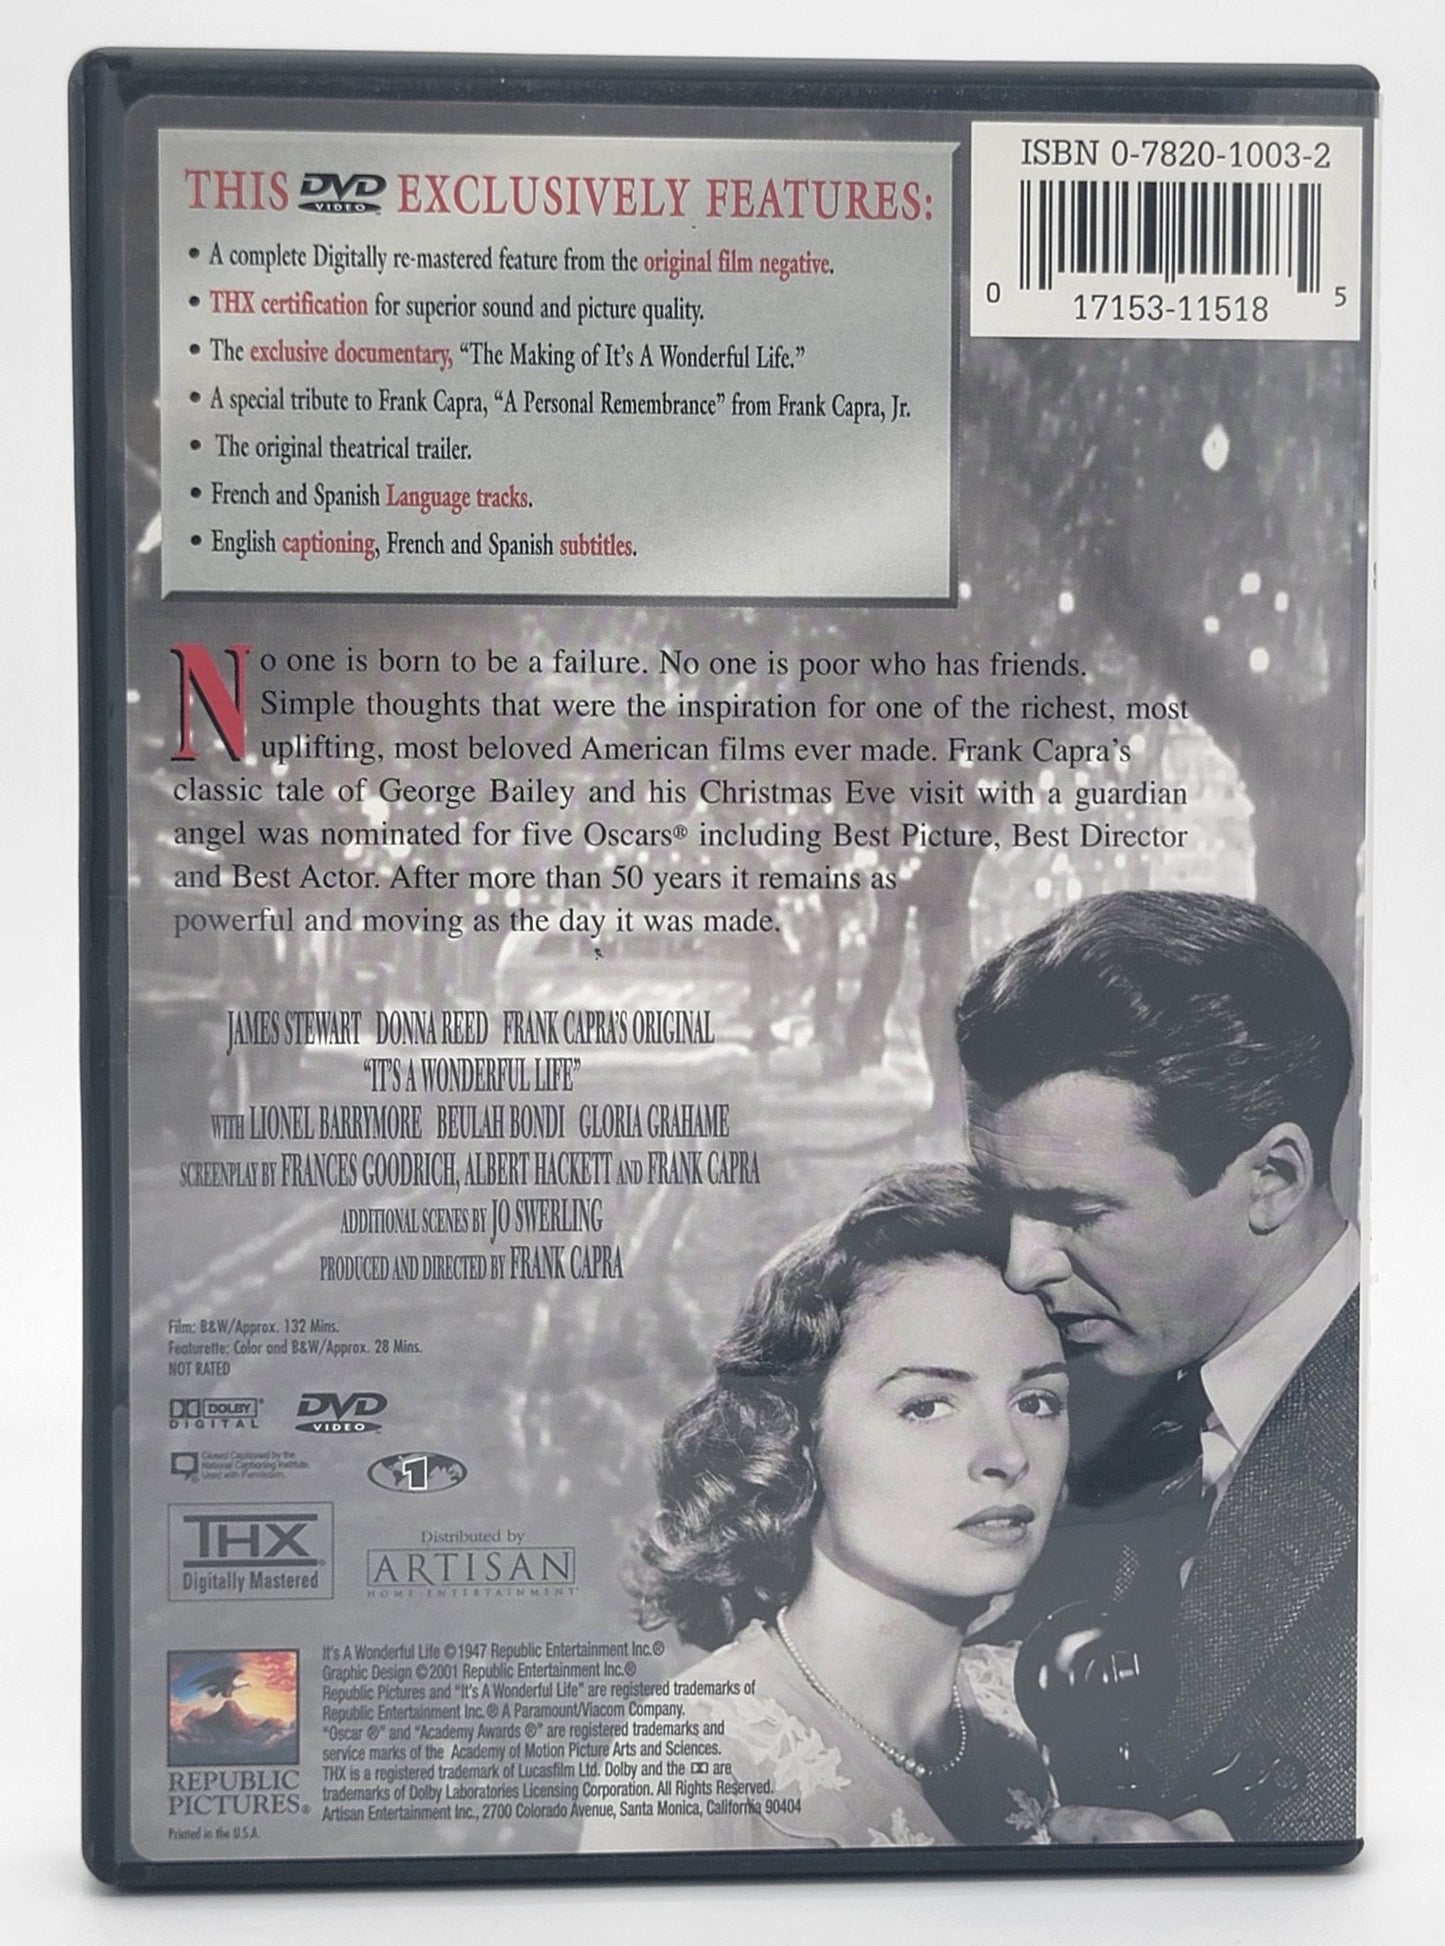 Republic Pictures - It's A Wonderful Life | DVD | Original Uncut Version - Digitally Mastered for Superior Sound & Picture - DVD - Steady Bunny Shop